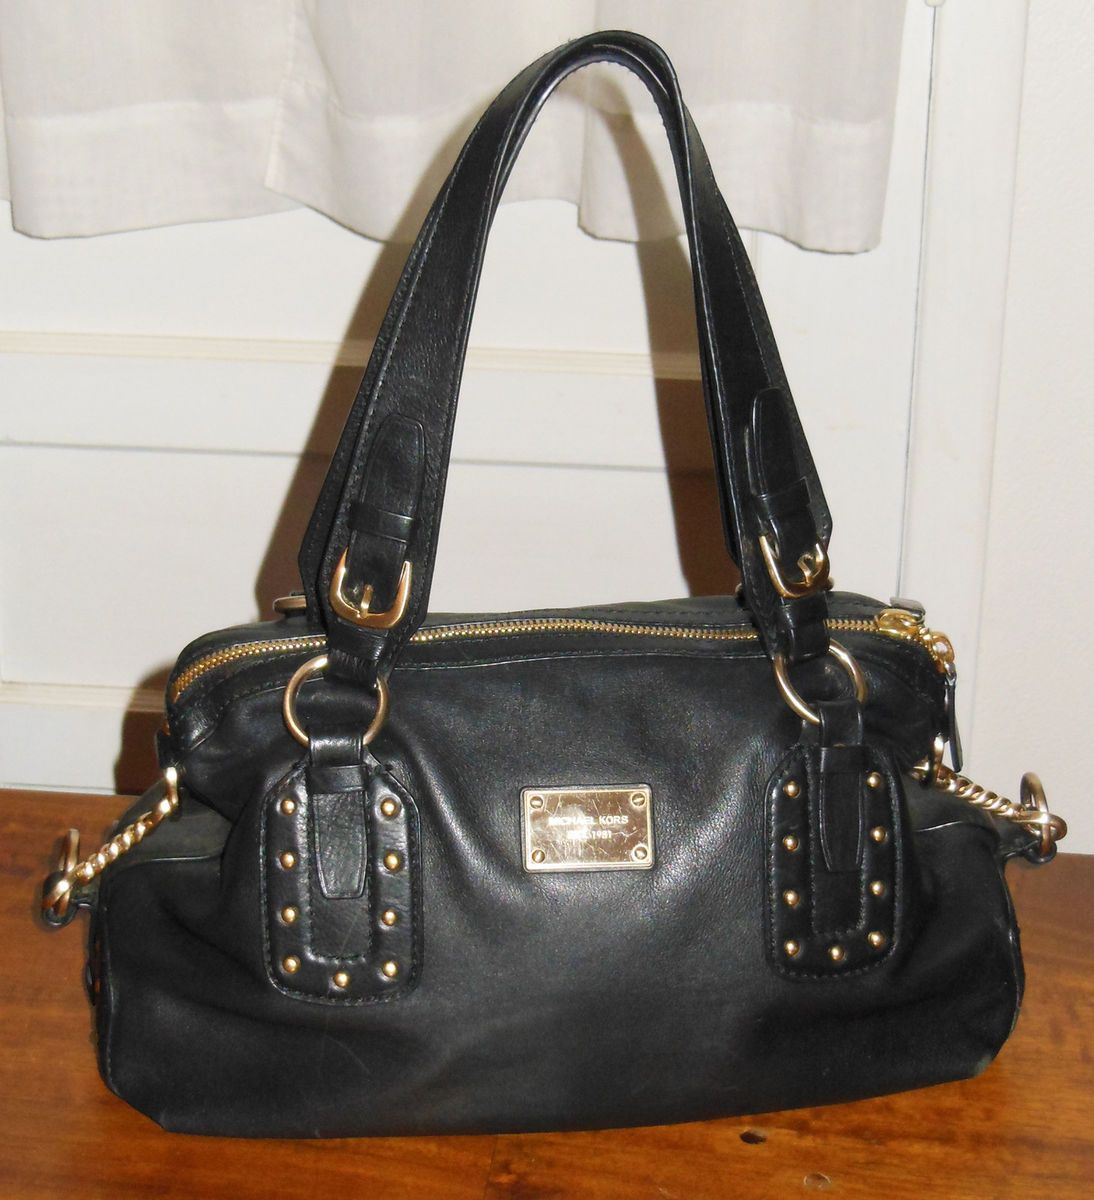 Michael Kors Black with Gold Accents Leather Bag